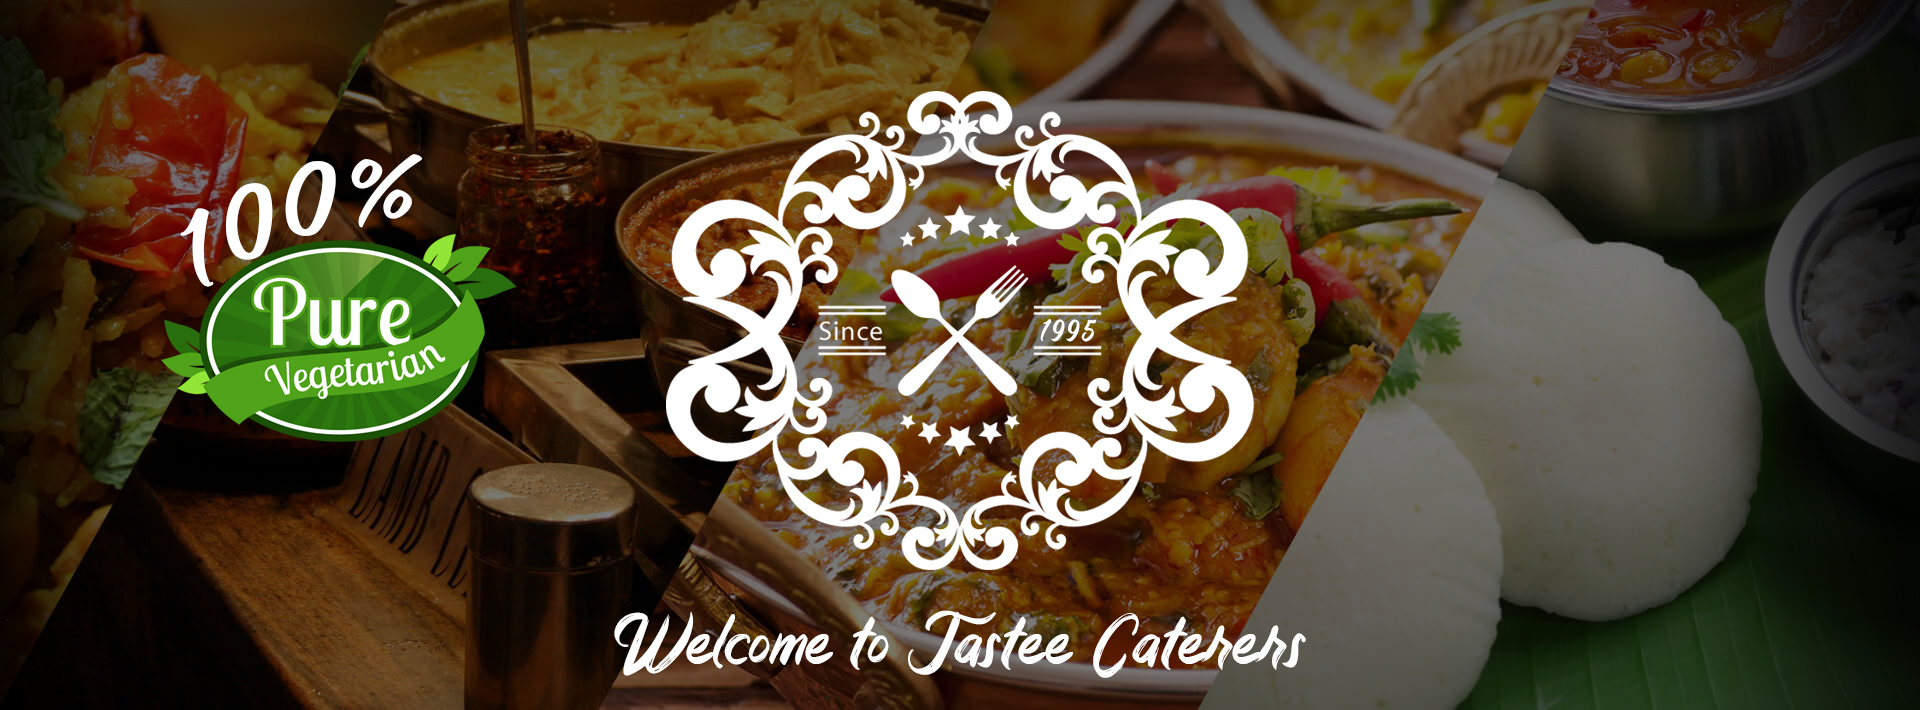 Pure Veg Food Catering Services in Chennai